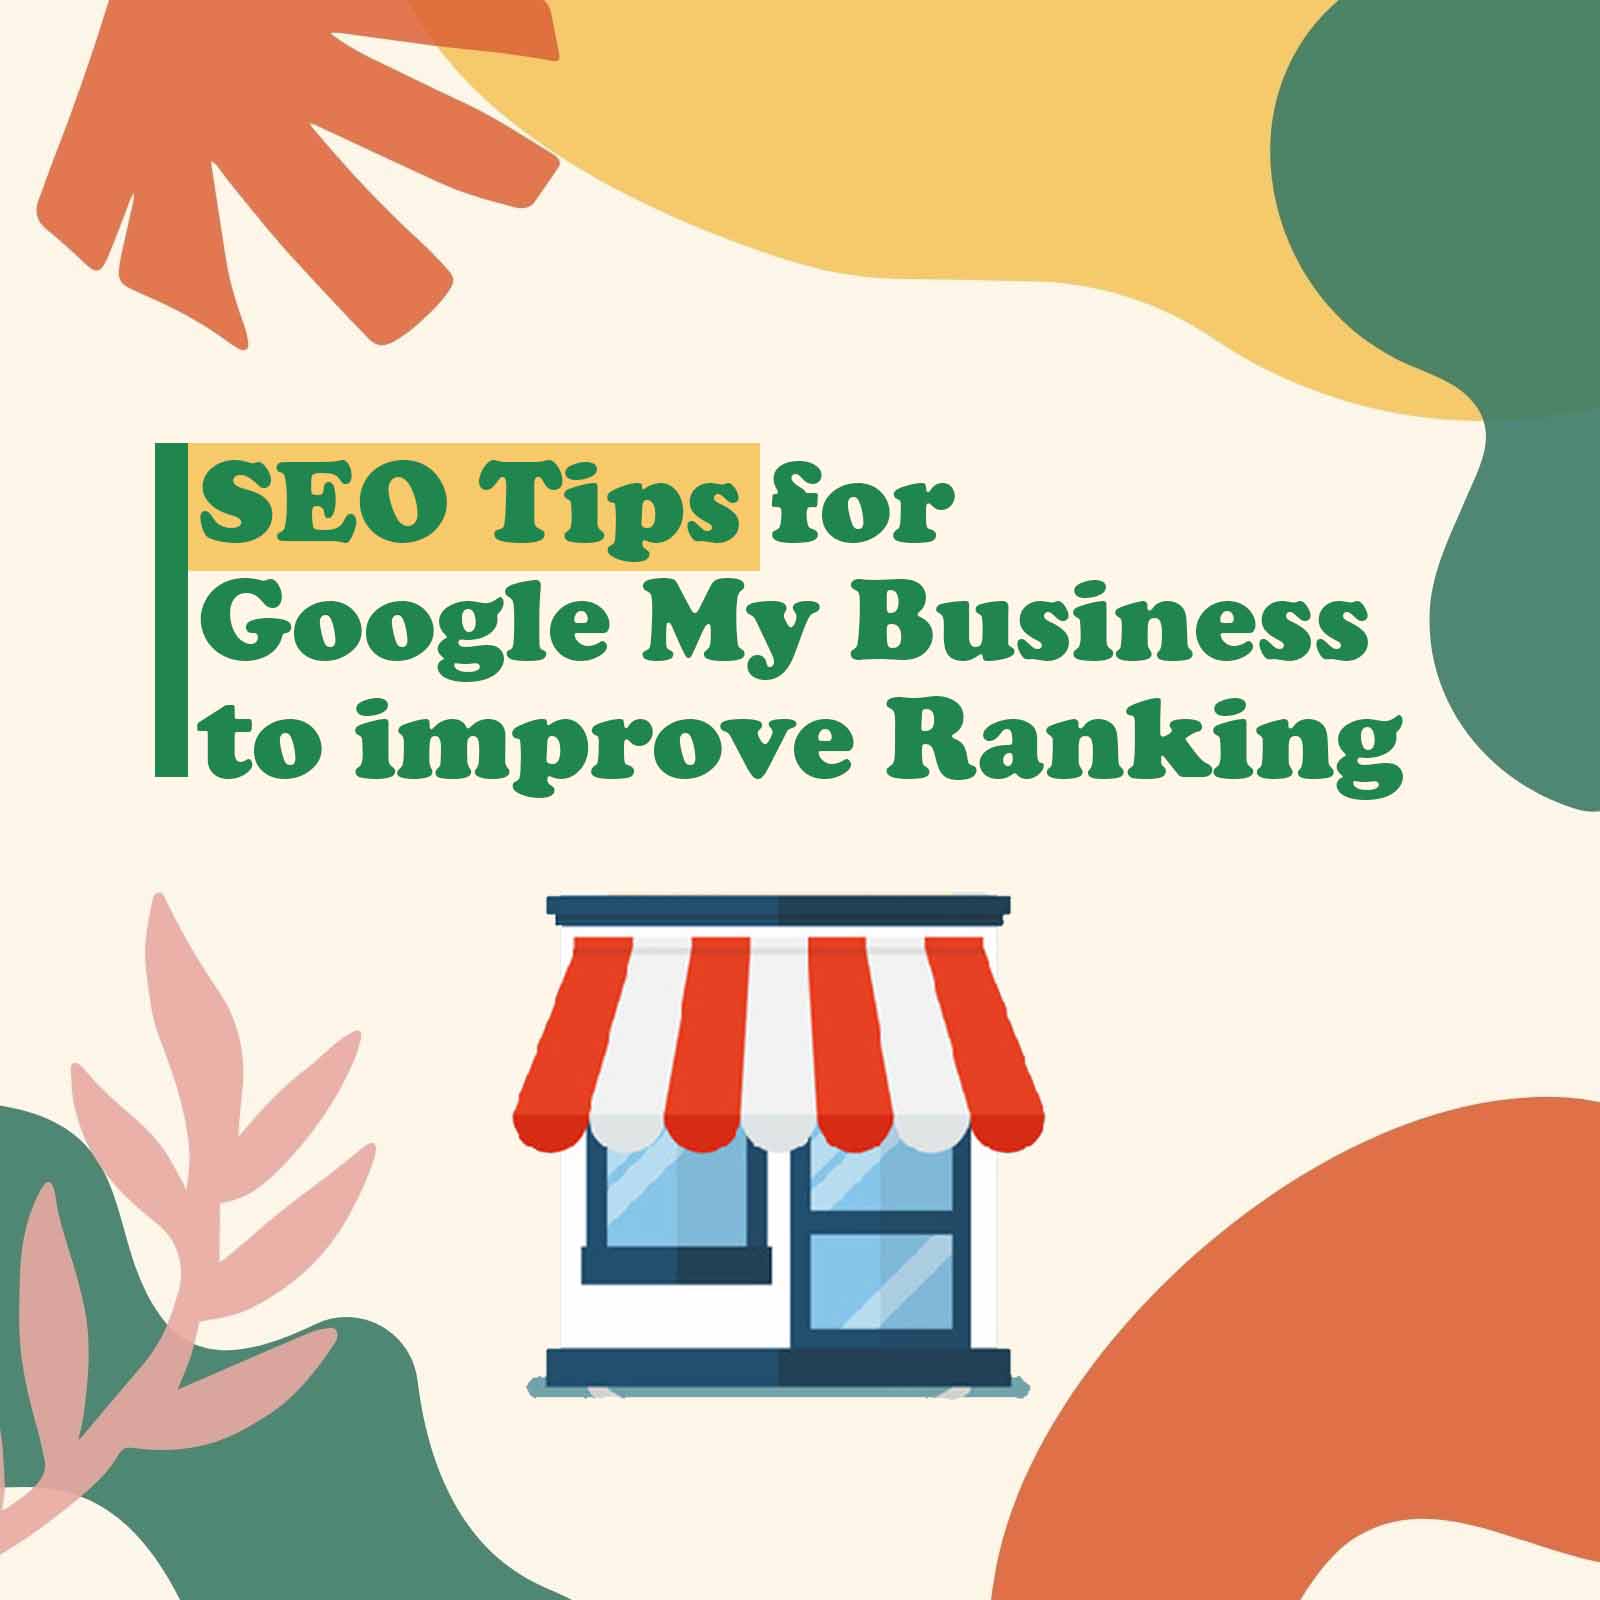 SEO Tips for Google My Business to improve Ranking